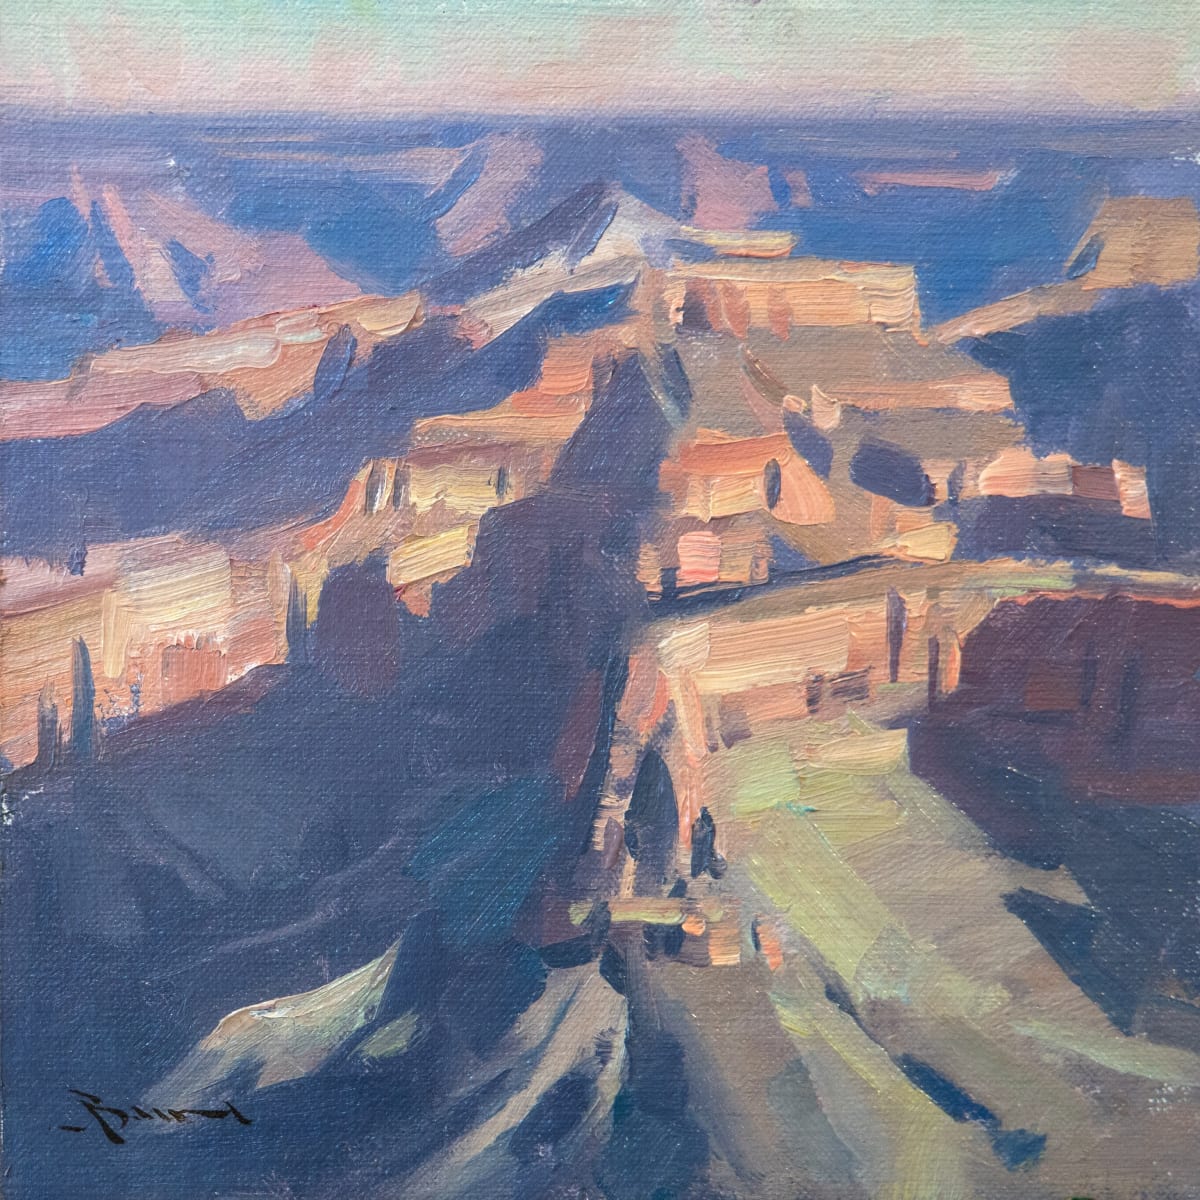 Plein Air Painting at the Grand Canyon